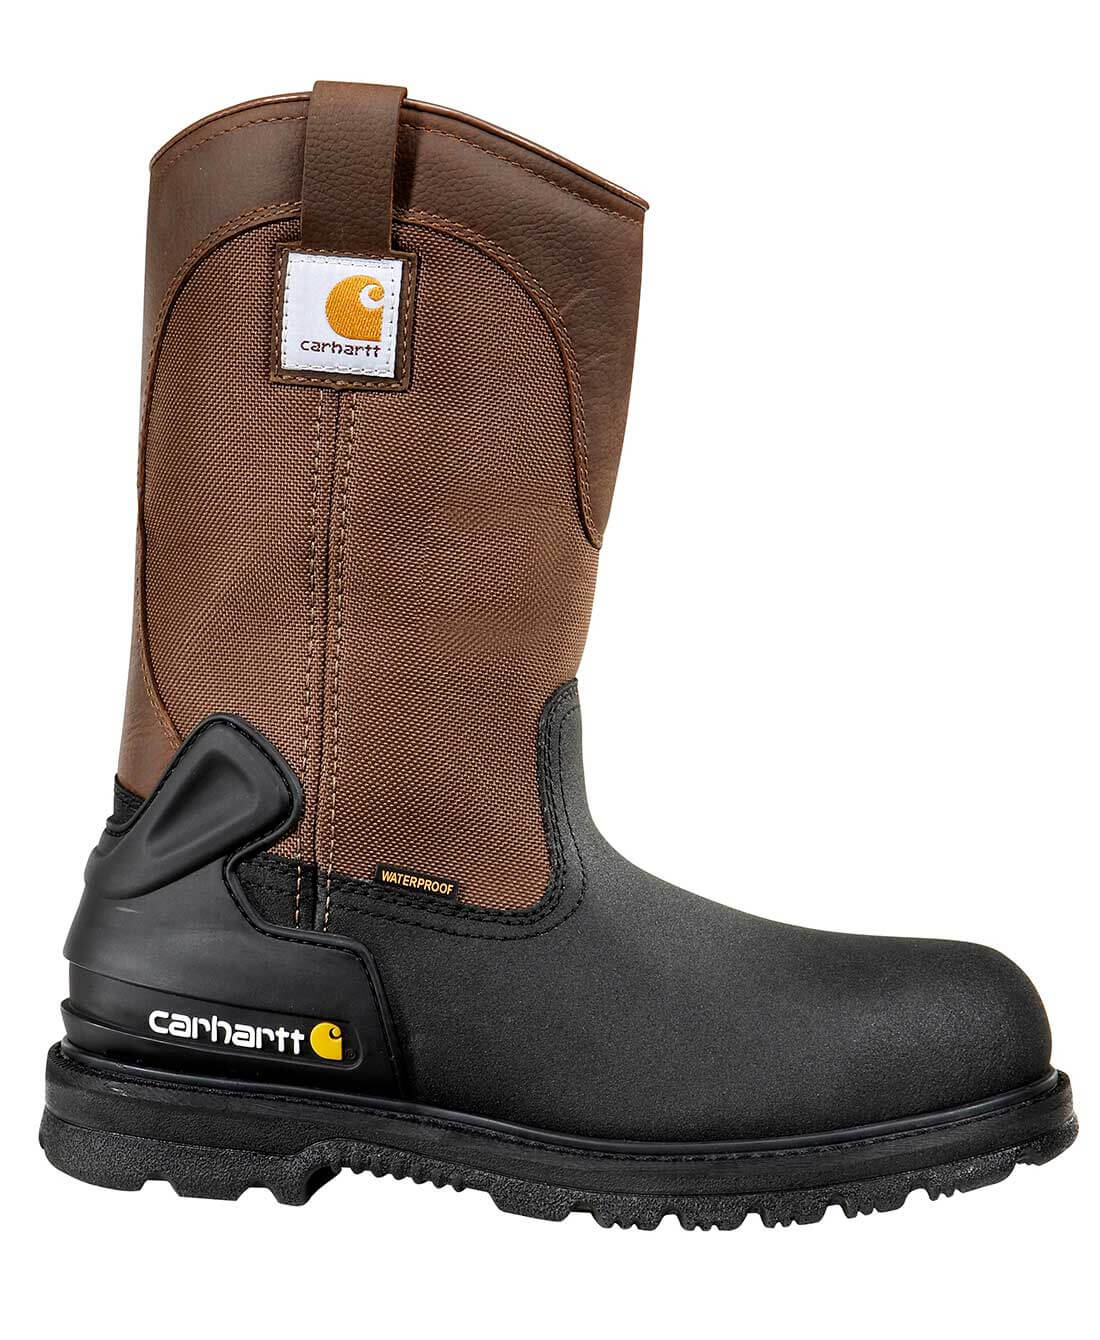 Carhartt - CMP1259 - Core Men's Blk PU Coated Leather/Brn Fabric Waterproof Insulated Steel Safety Toe 11 Wellington Work Boot